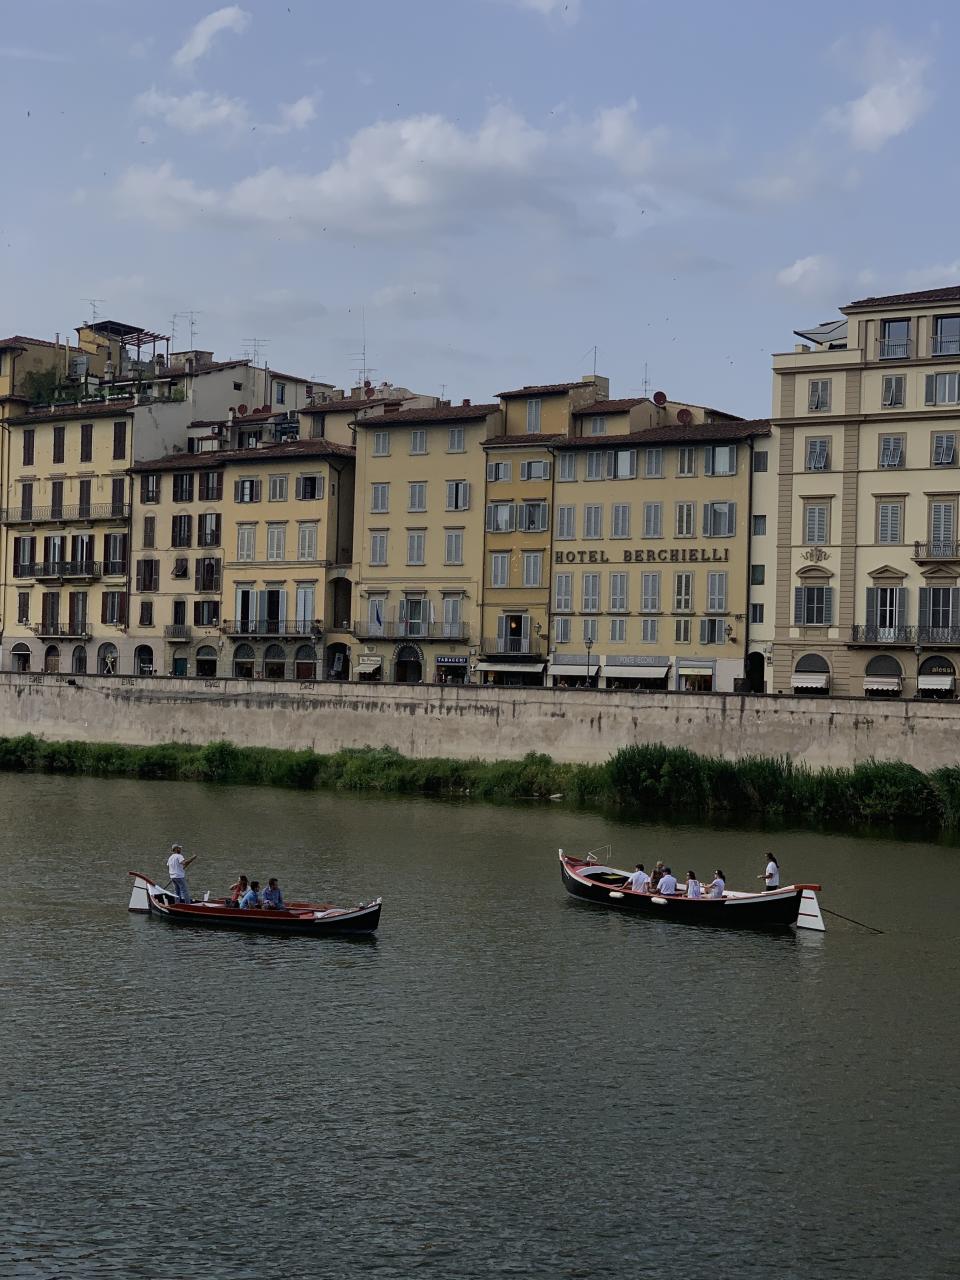 <h1 class="title">When your commute includes crossing the Arno, you can’t but help snap a couple photos.</h1><cite class="credit">Photo: Justin Fernandez</cite>